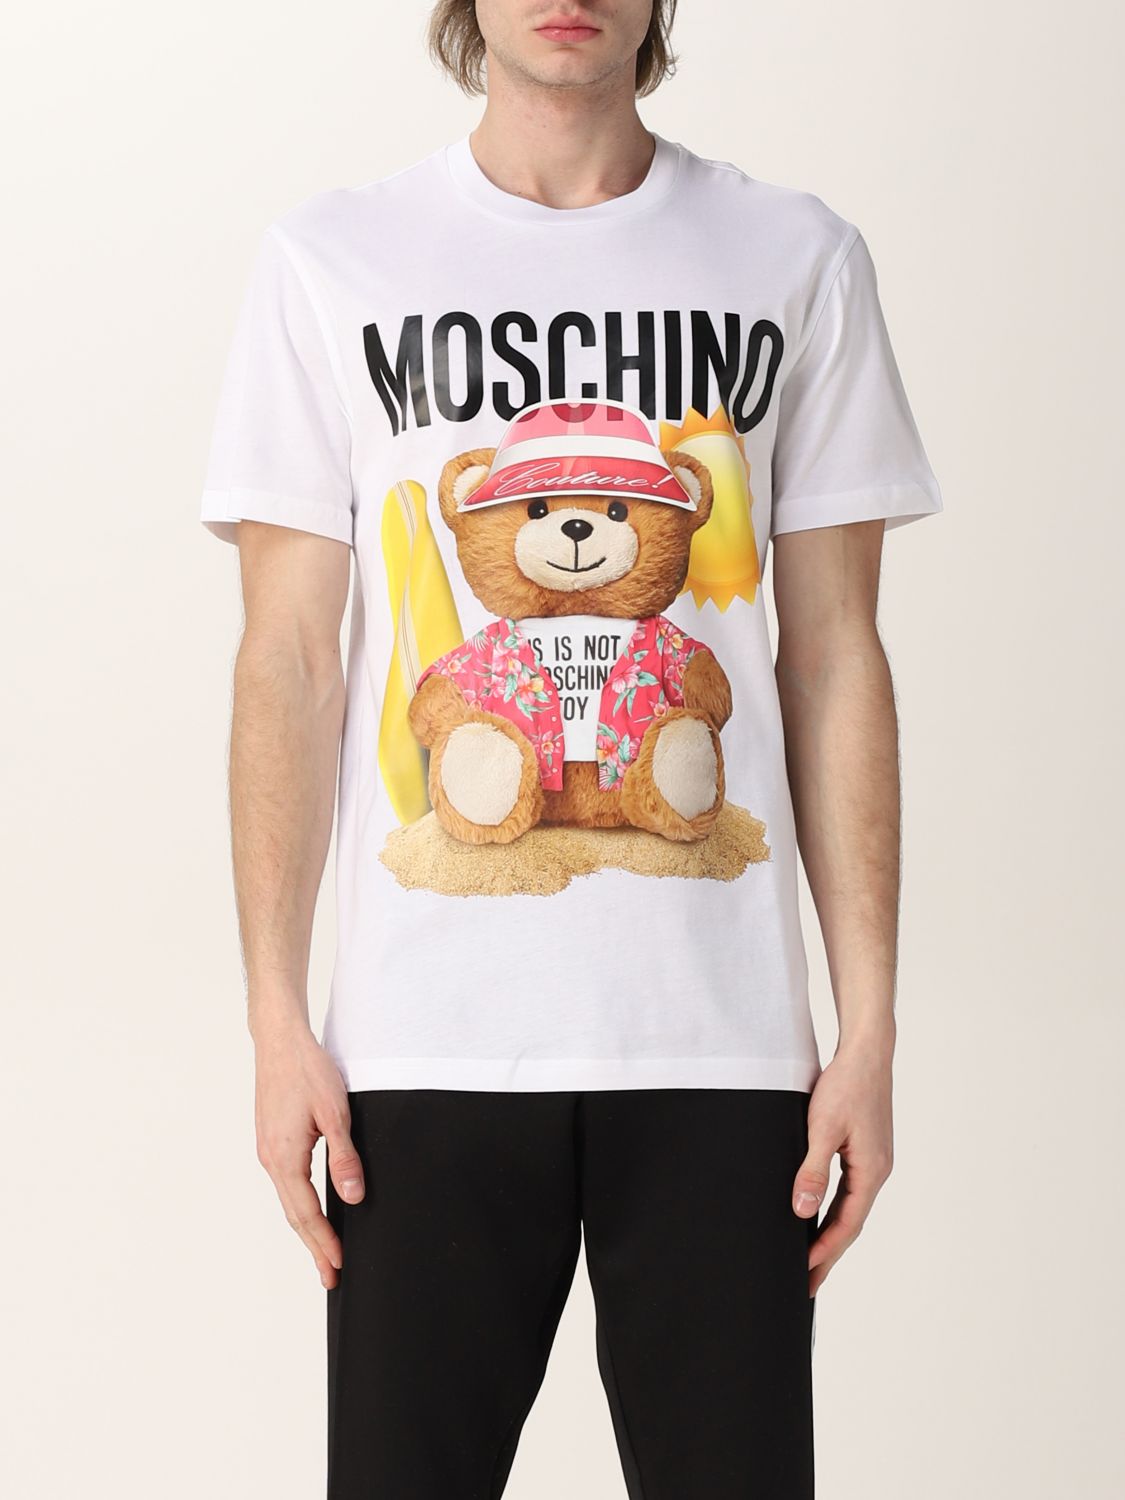 Feudal Don't want Plain MOSCHINO COUTURE: T-shirt with Teddy Bear logo - White | Moschino Couture t- shirt 07172041 online on GIGLIO.COM